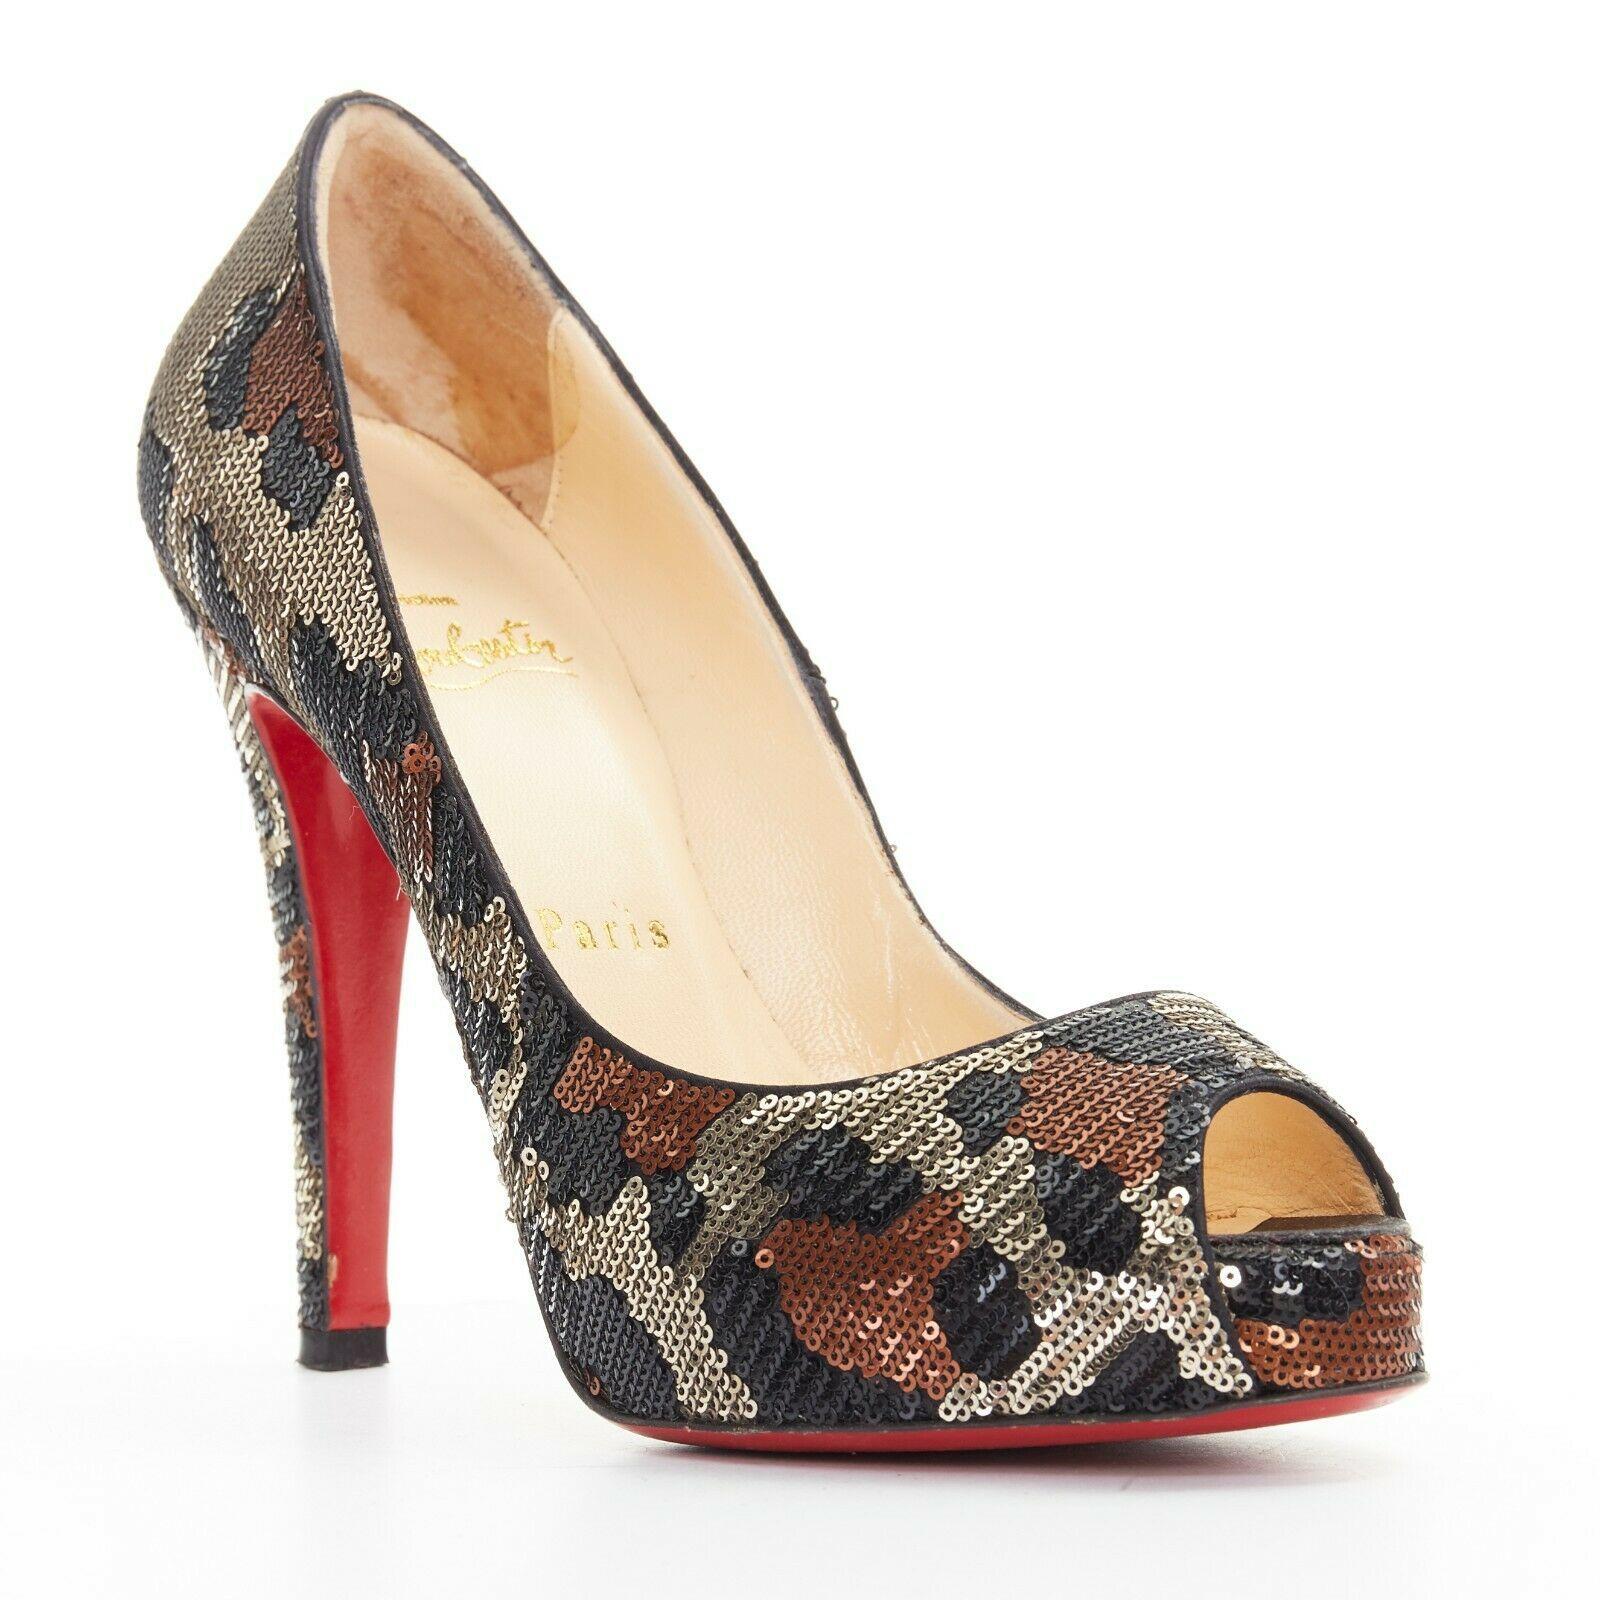 CHRISTIAN LOUBOUTIN Very Prive 120 leopard sequins peep toe platform heel EU35.5
CHRISTIAN LOUBOUTIN
Very Prive 120. 
Gold leopard sequins upper. 
Peep toe. 
Concealed platform sole. 
Slim high heel. 
Padded tan leather lining. 
Signature Christian